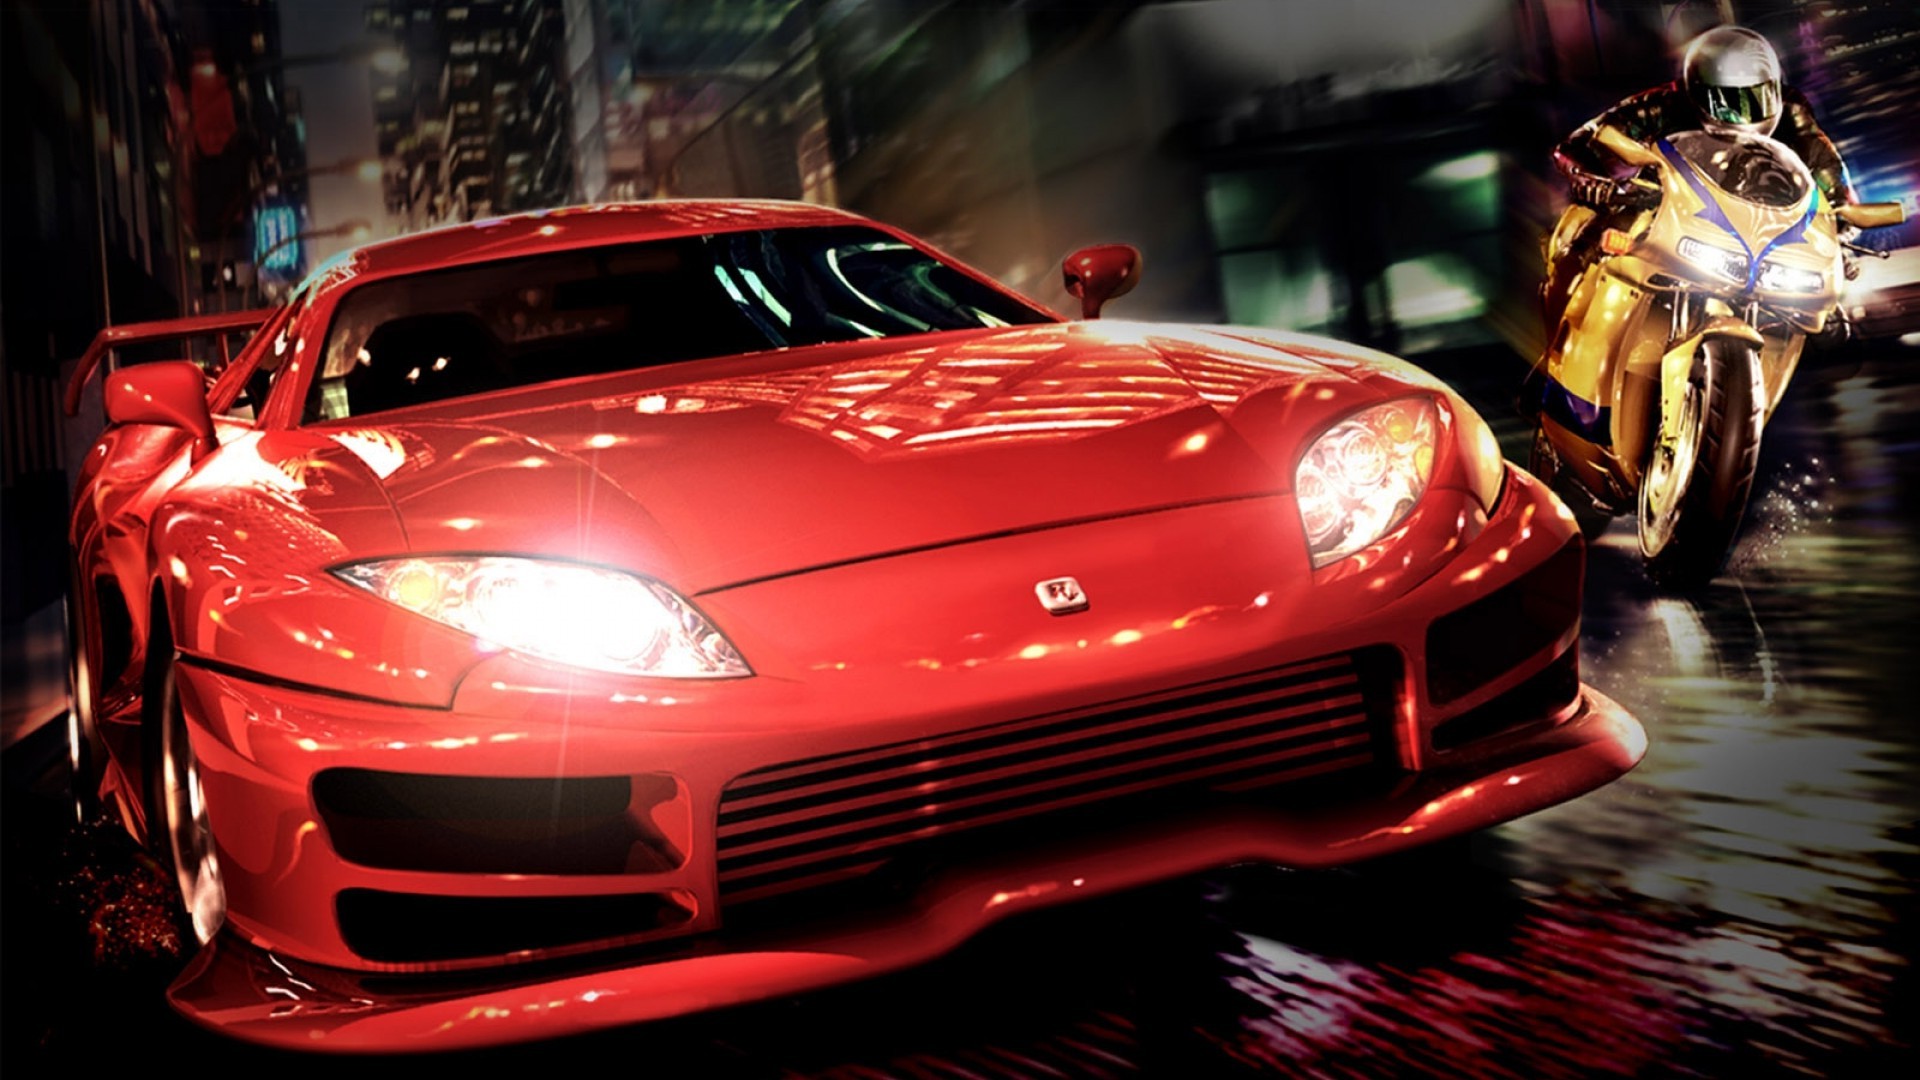 Red City Night Bikes Toyota Supra Car Video Games Red Cars Motorcycle Vehicle Midnight Club 2 1920x1080